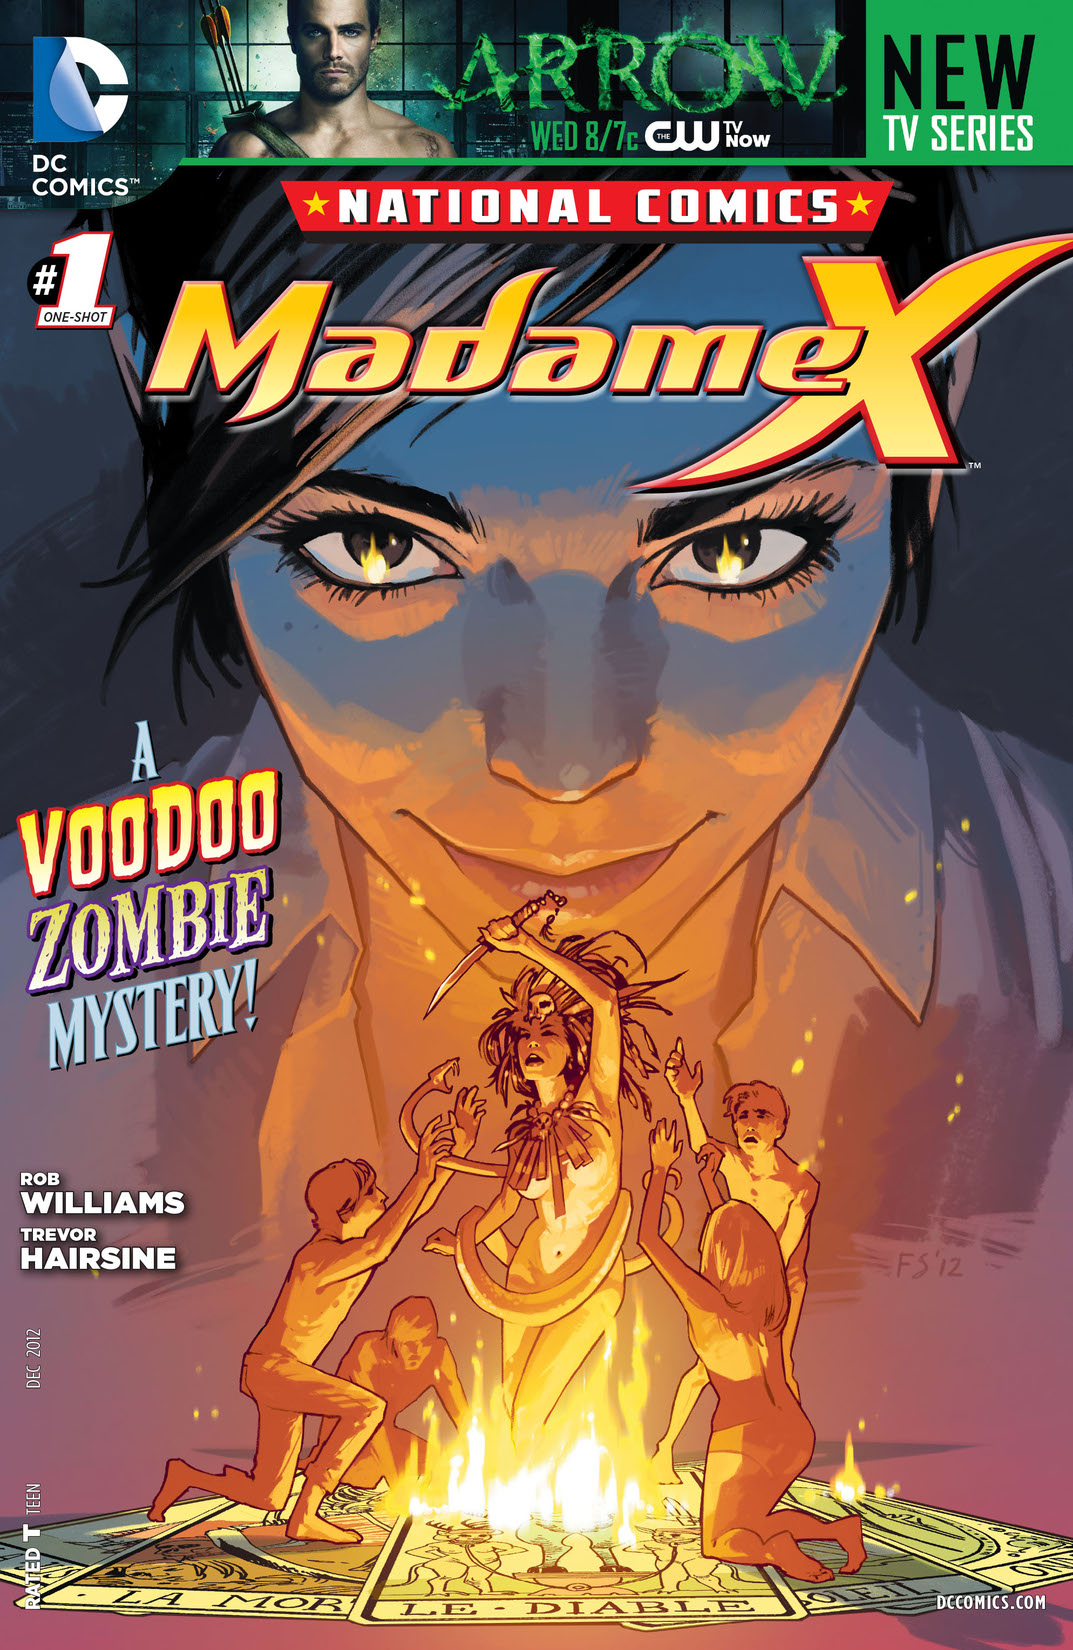 National Comics: Madame X #1 preview images